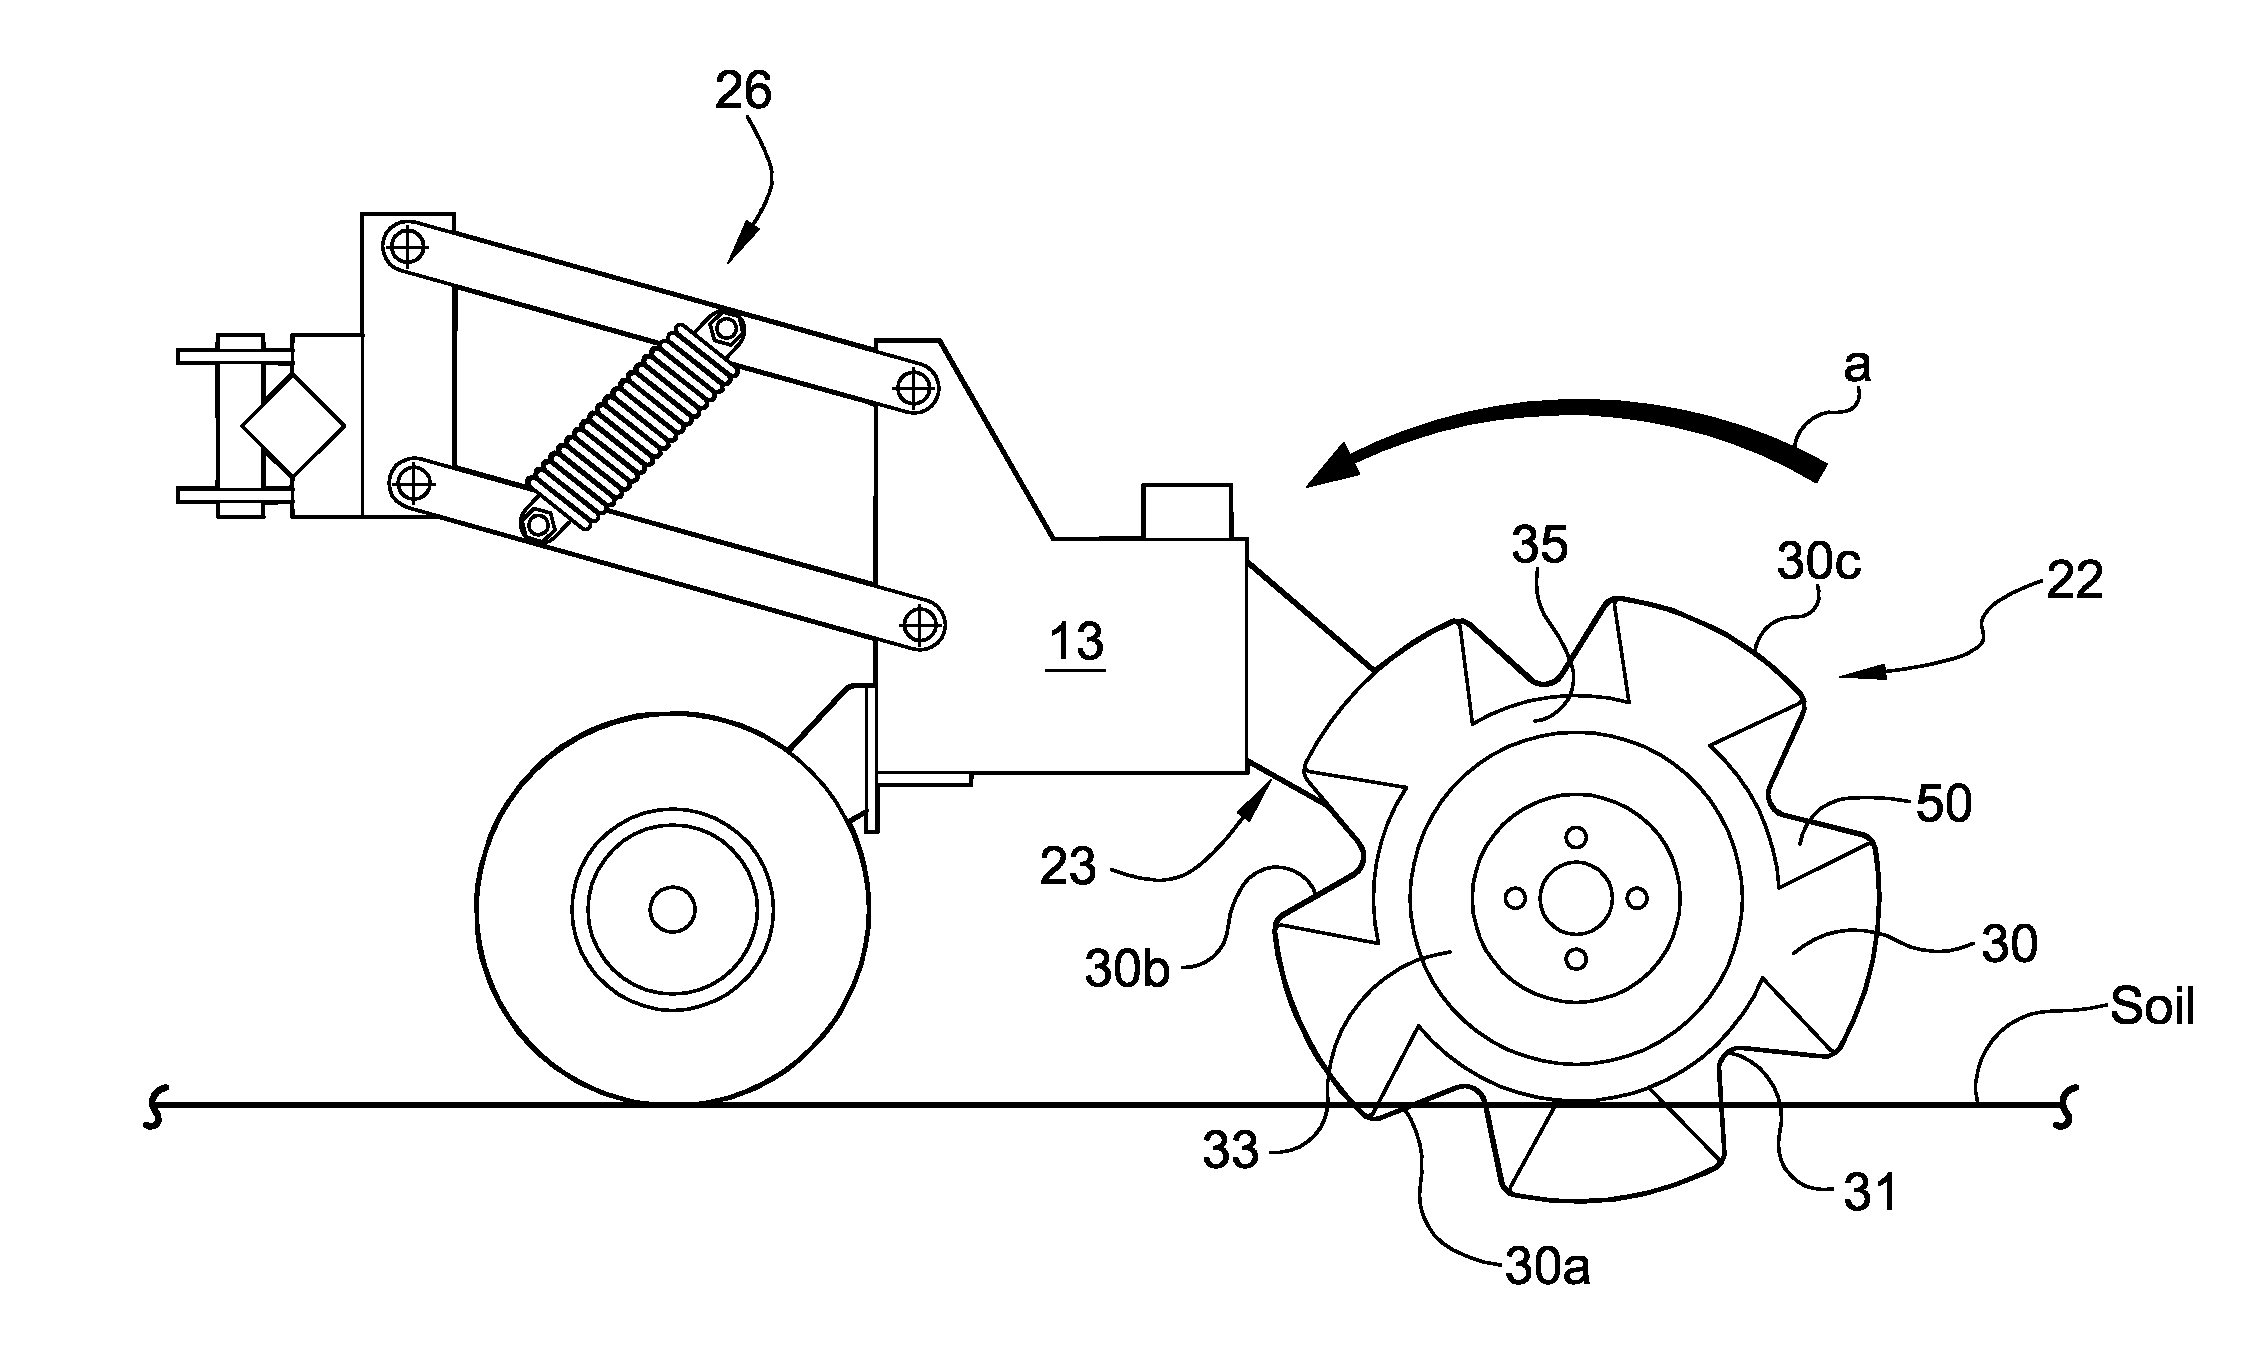 Soil conditioning disc and configurable disc assembly